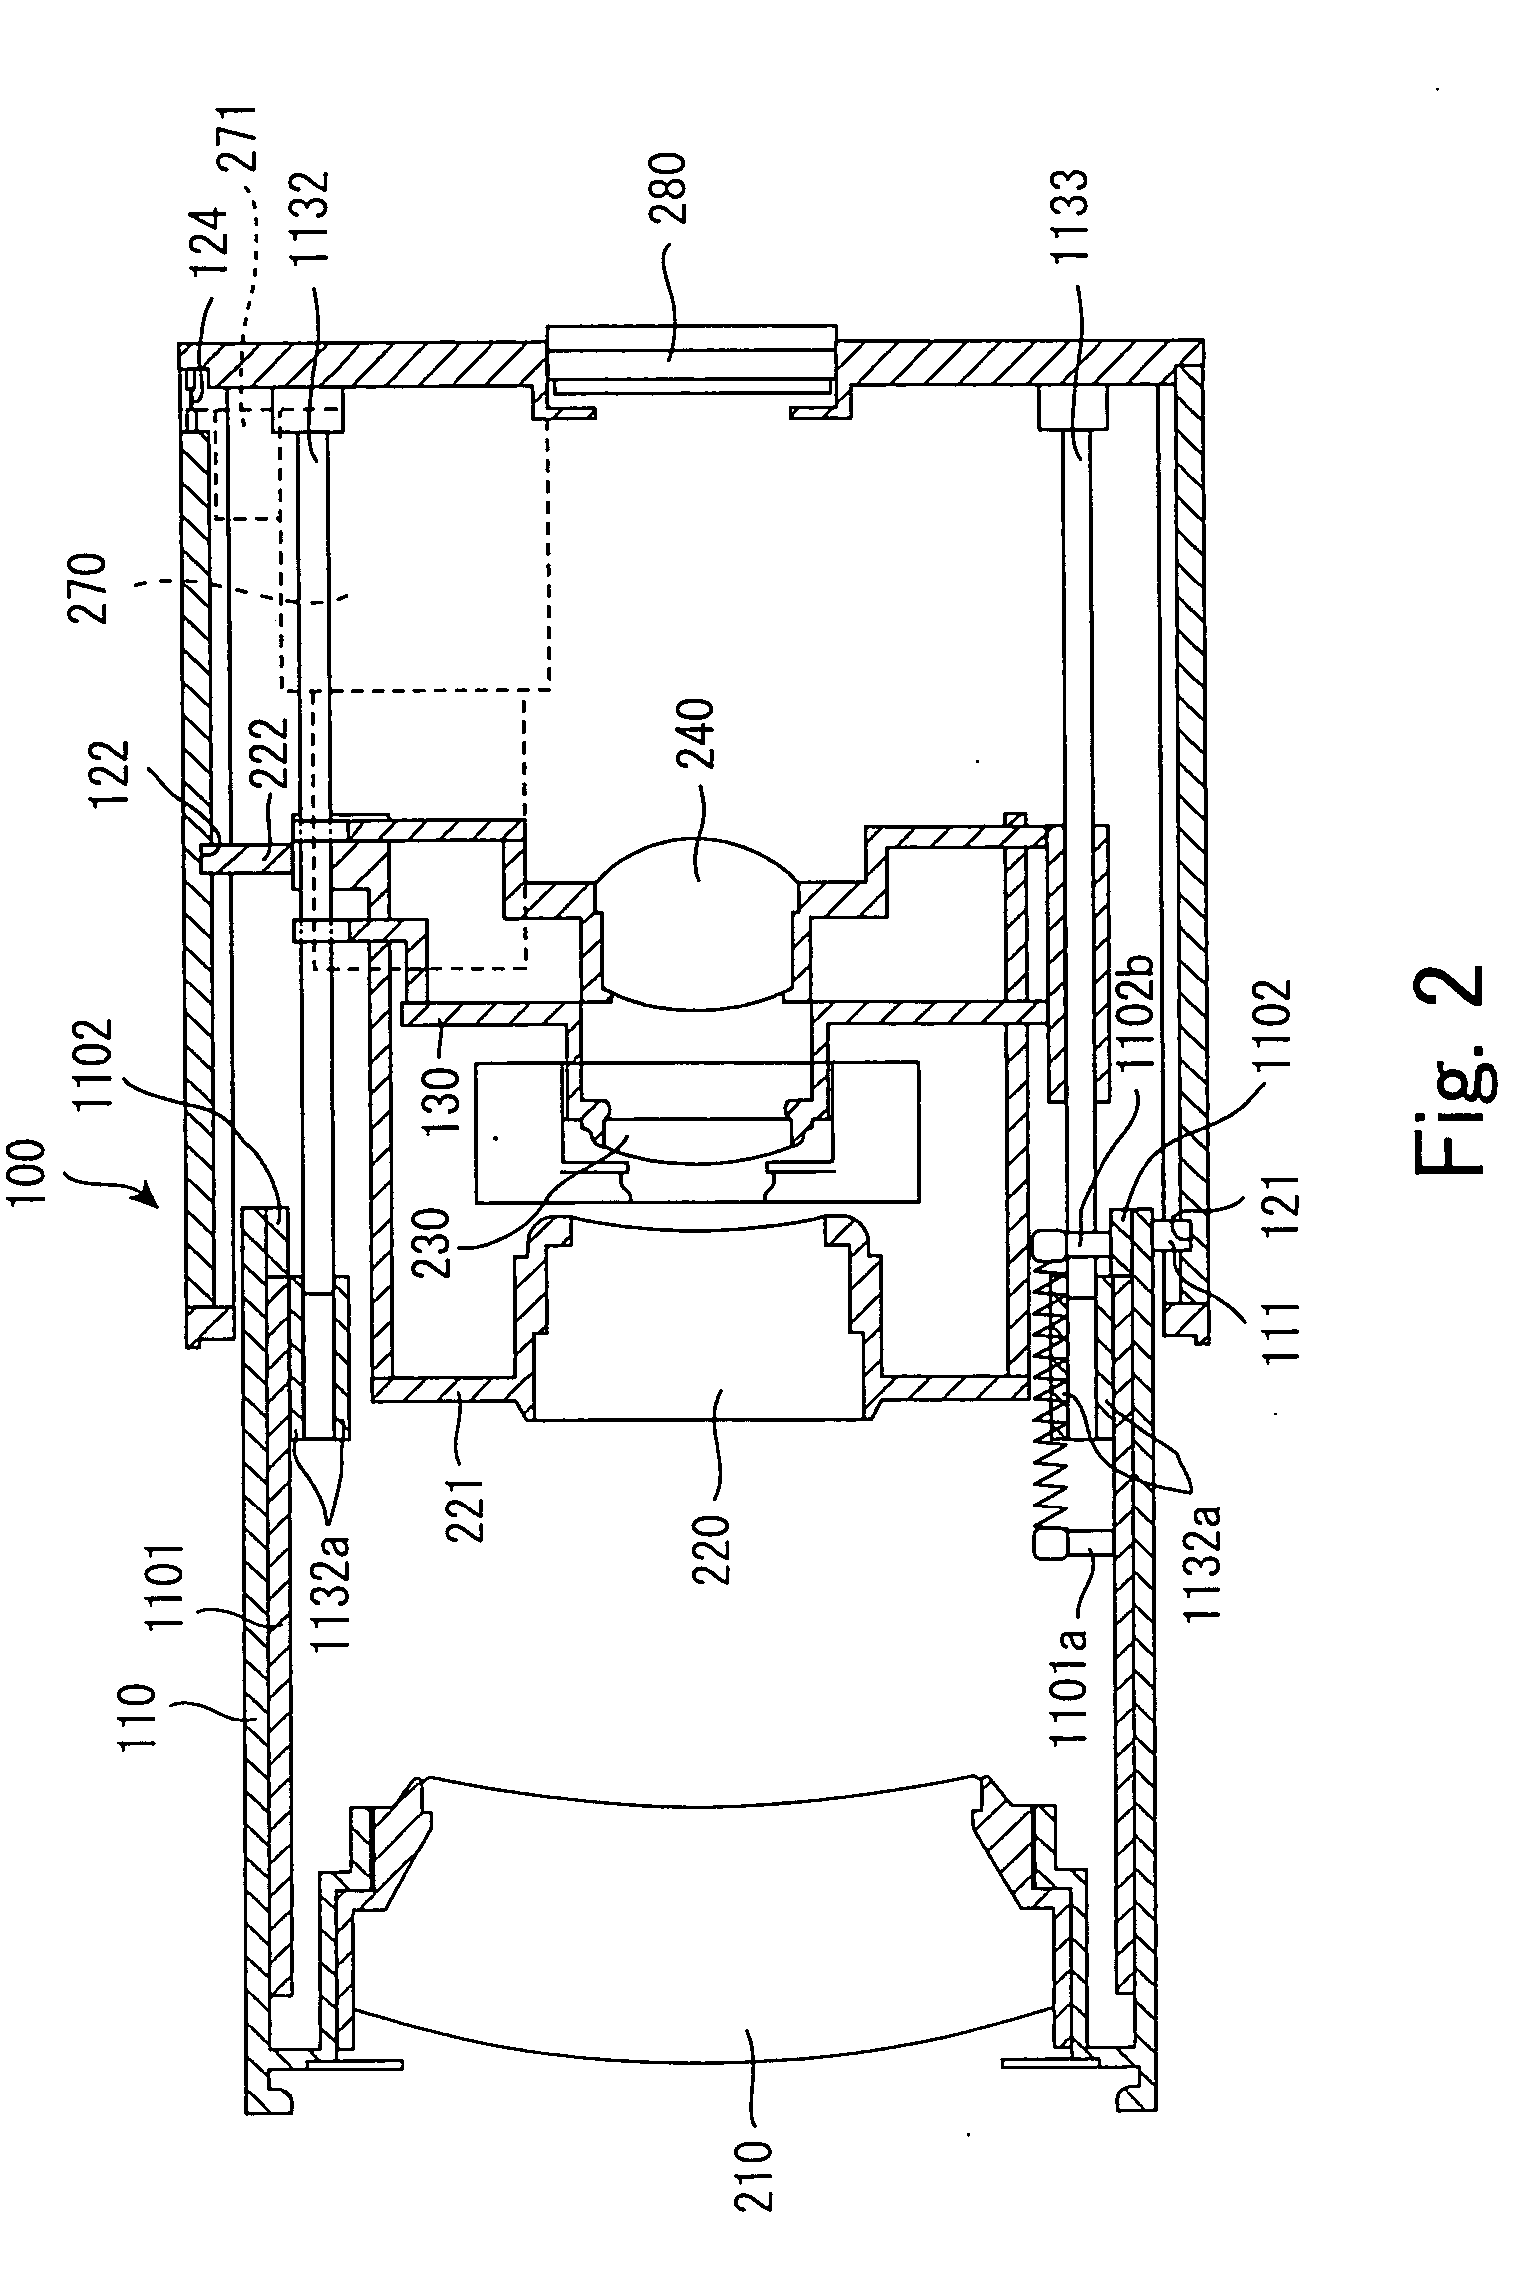 Lens barrel and image taking apparatus